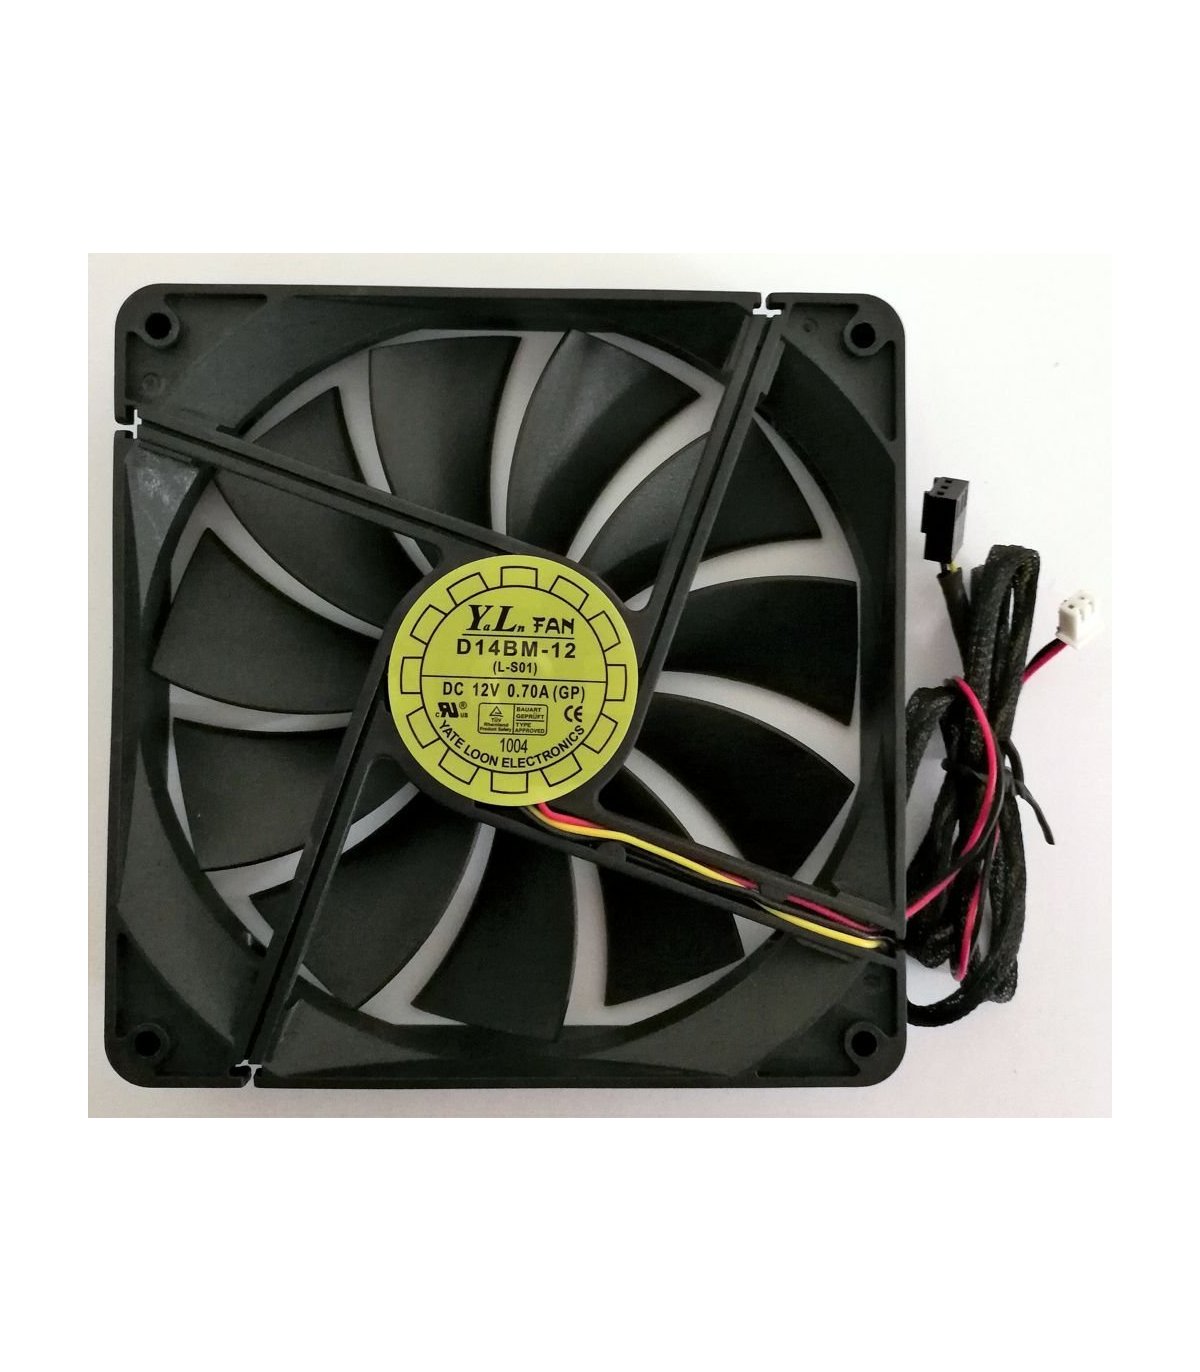 135mm Yate Loon Low-noise Fan w/ RPM cable for Chill ATX PSU's